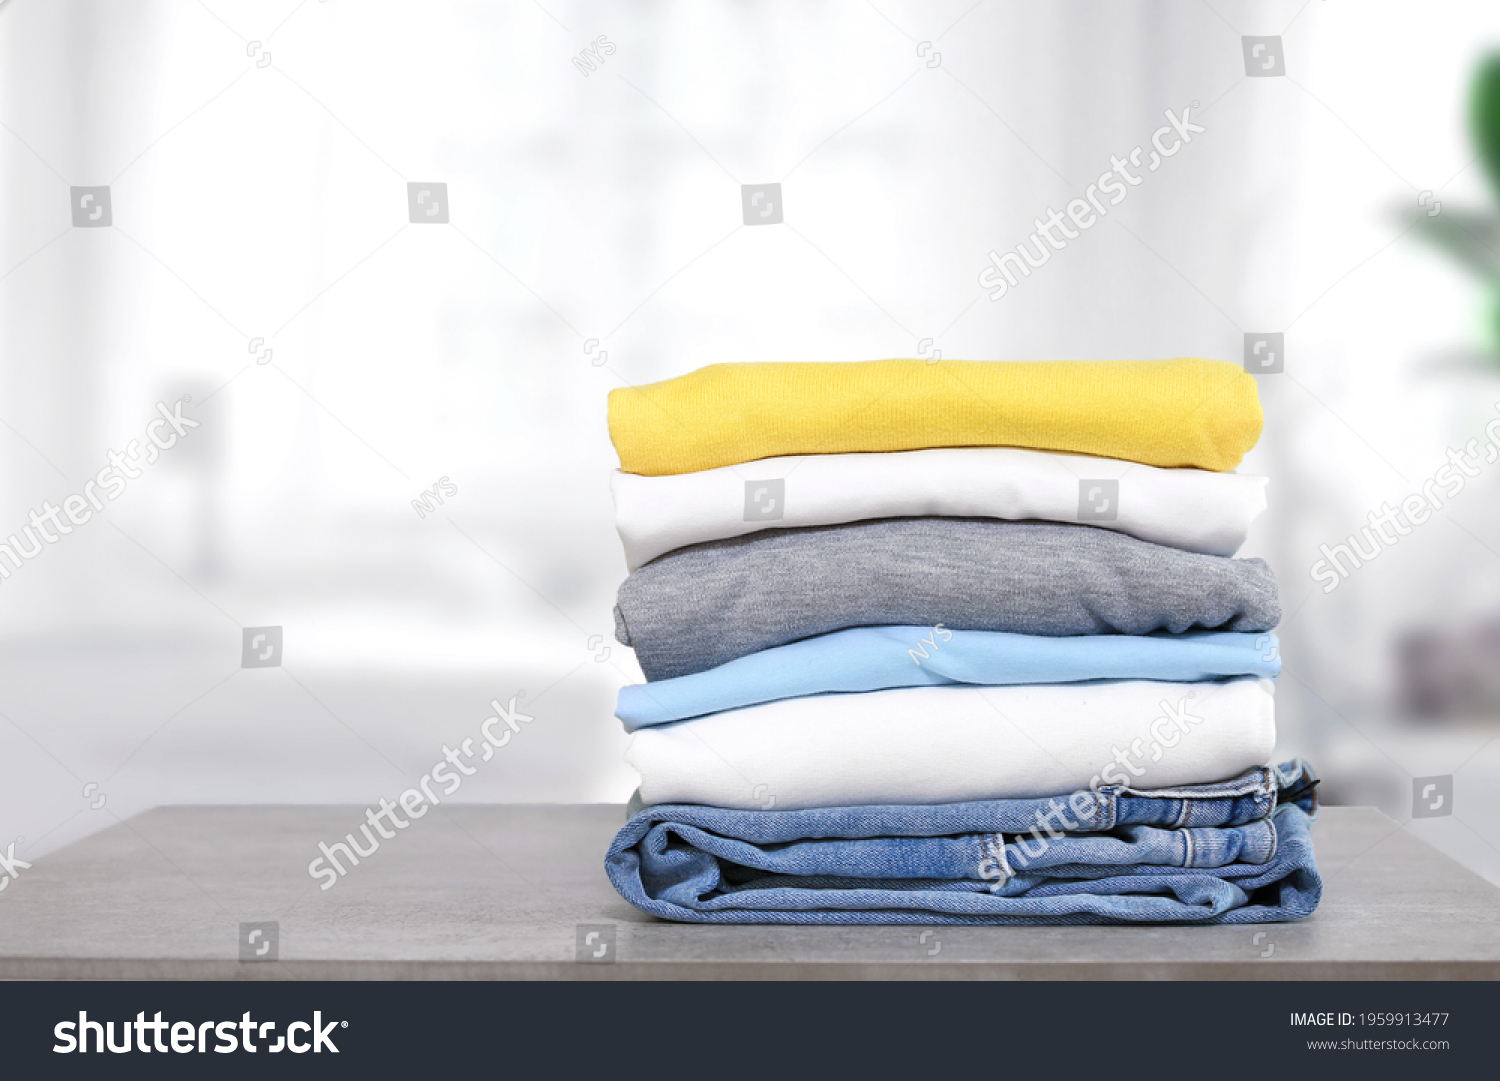 Stack of cotton colorful clothes on table indoors.Stacked apparel.Folded clean clothing.Household. #1959913477